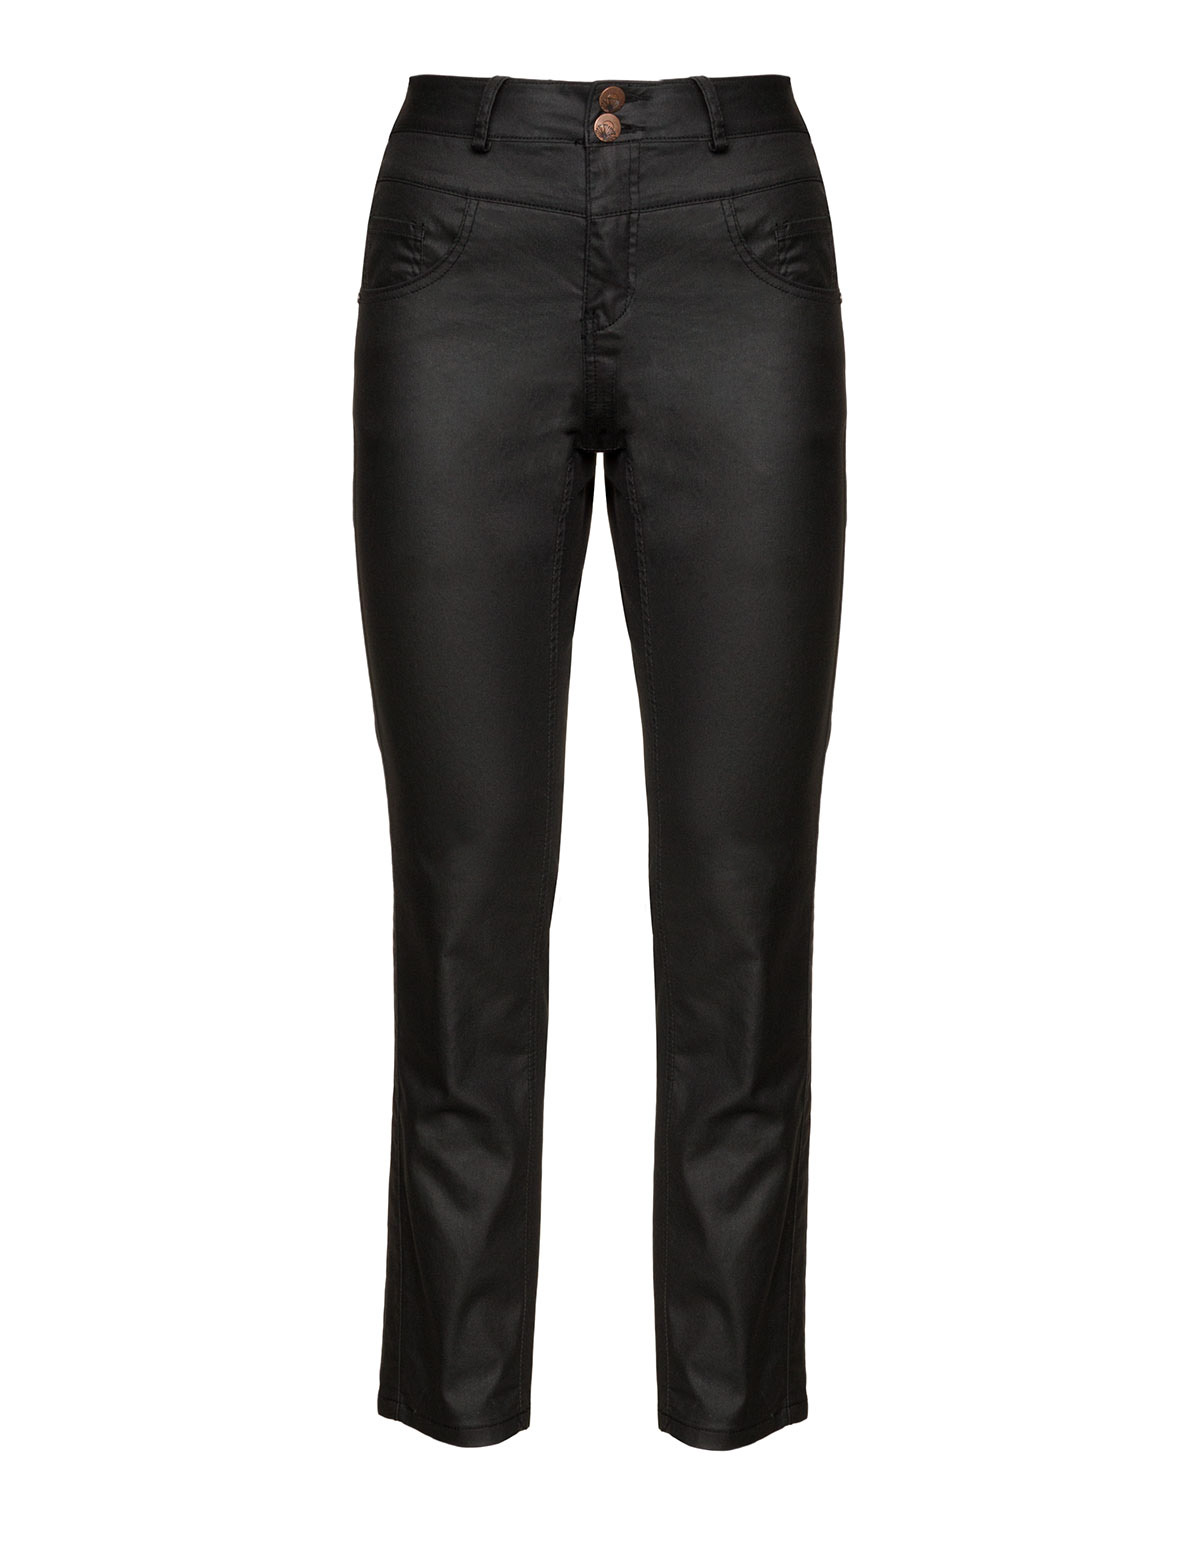 Coated slim fit Nille jeans by
Zizzi